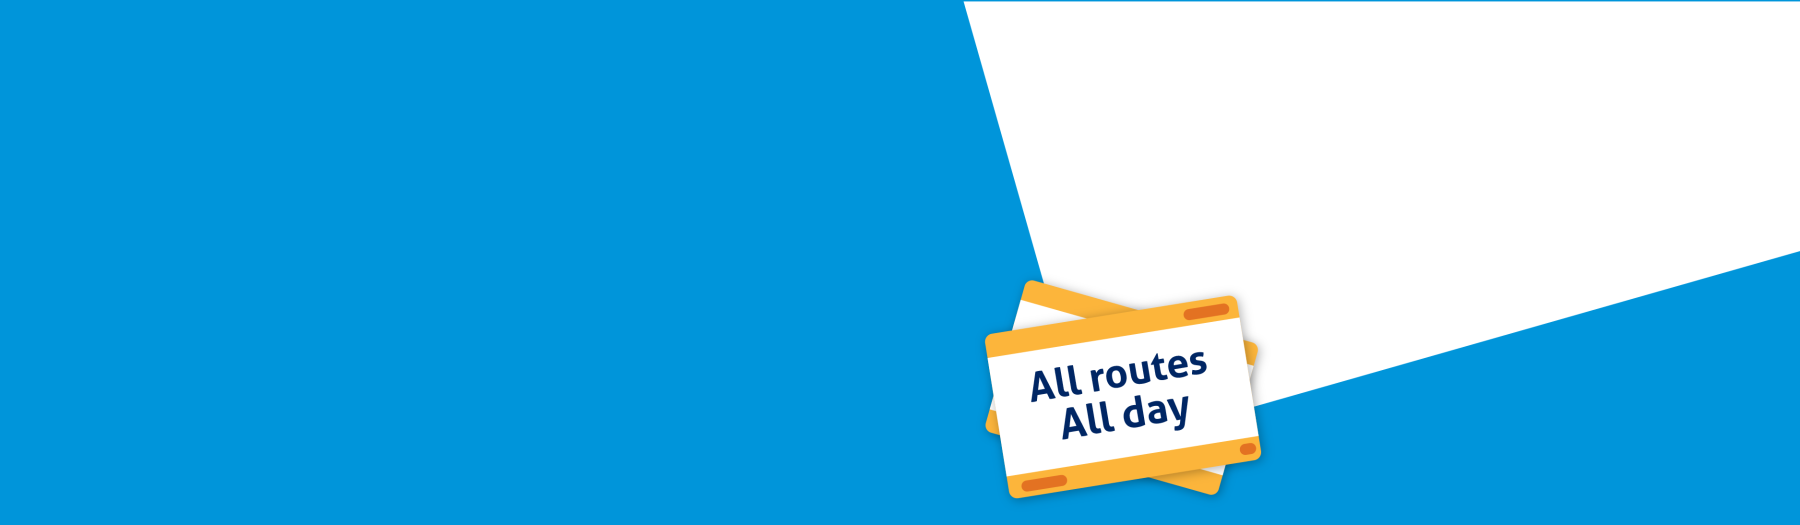 Buy one get one free illustration displaying a rail ticket with text: All routes, All Day